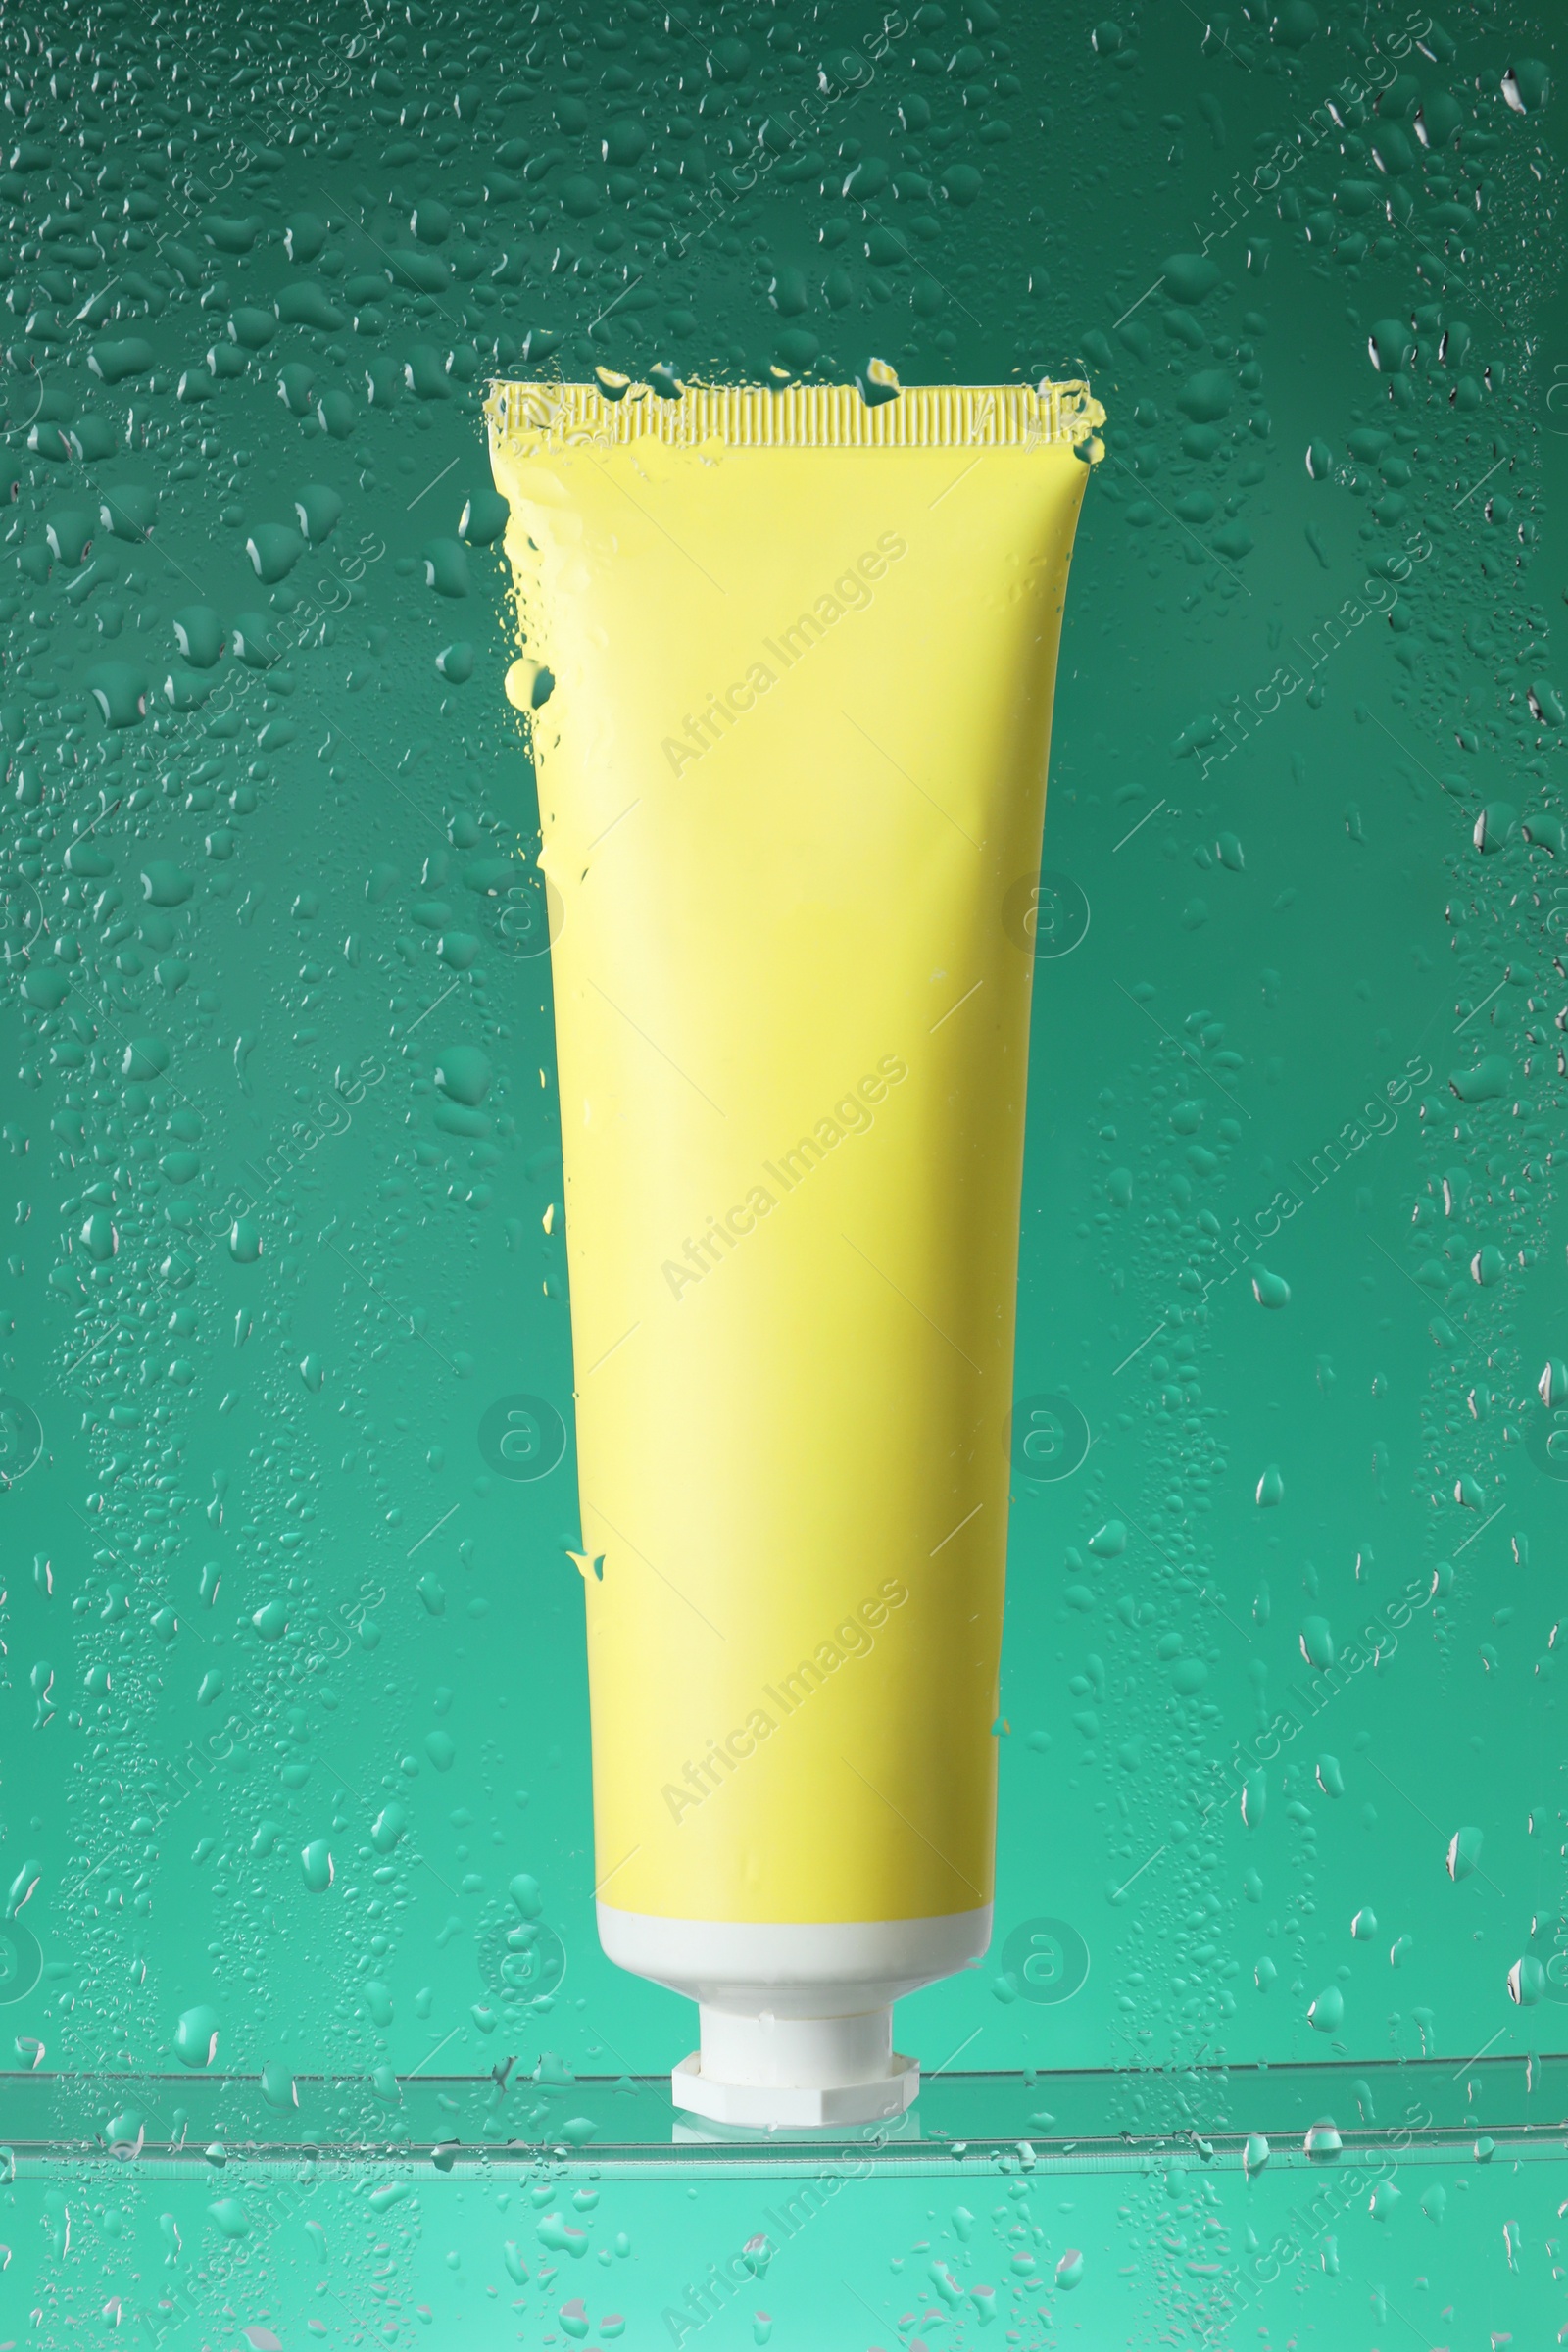 Photo of Tube with moisturizing cream on green background, view through wet glass